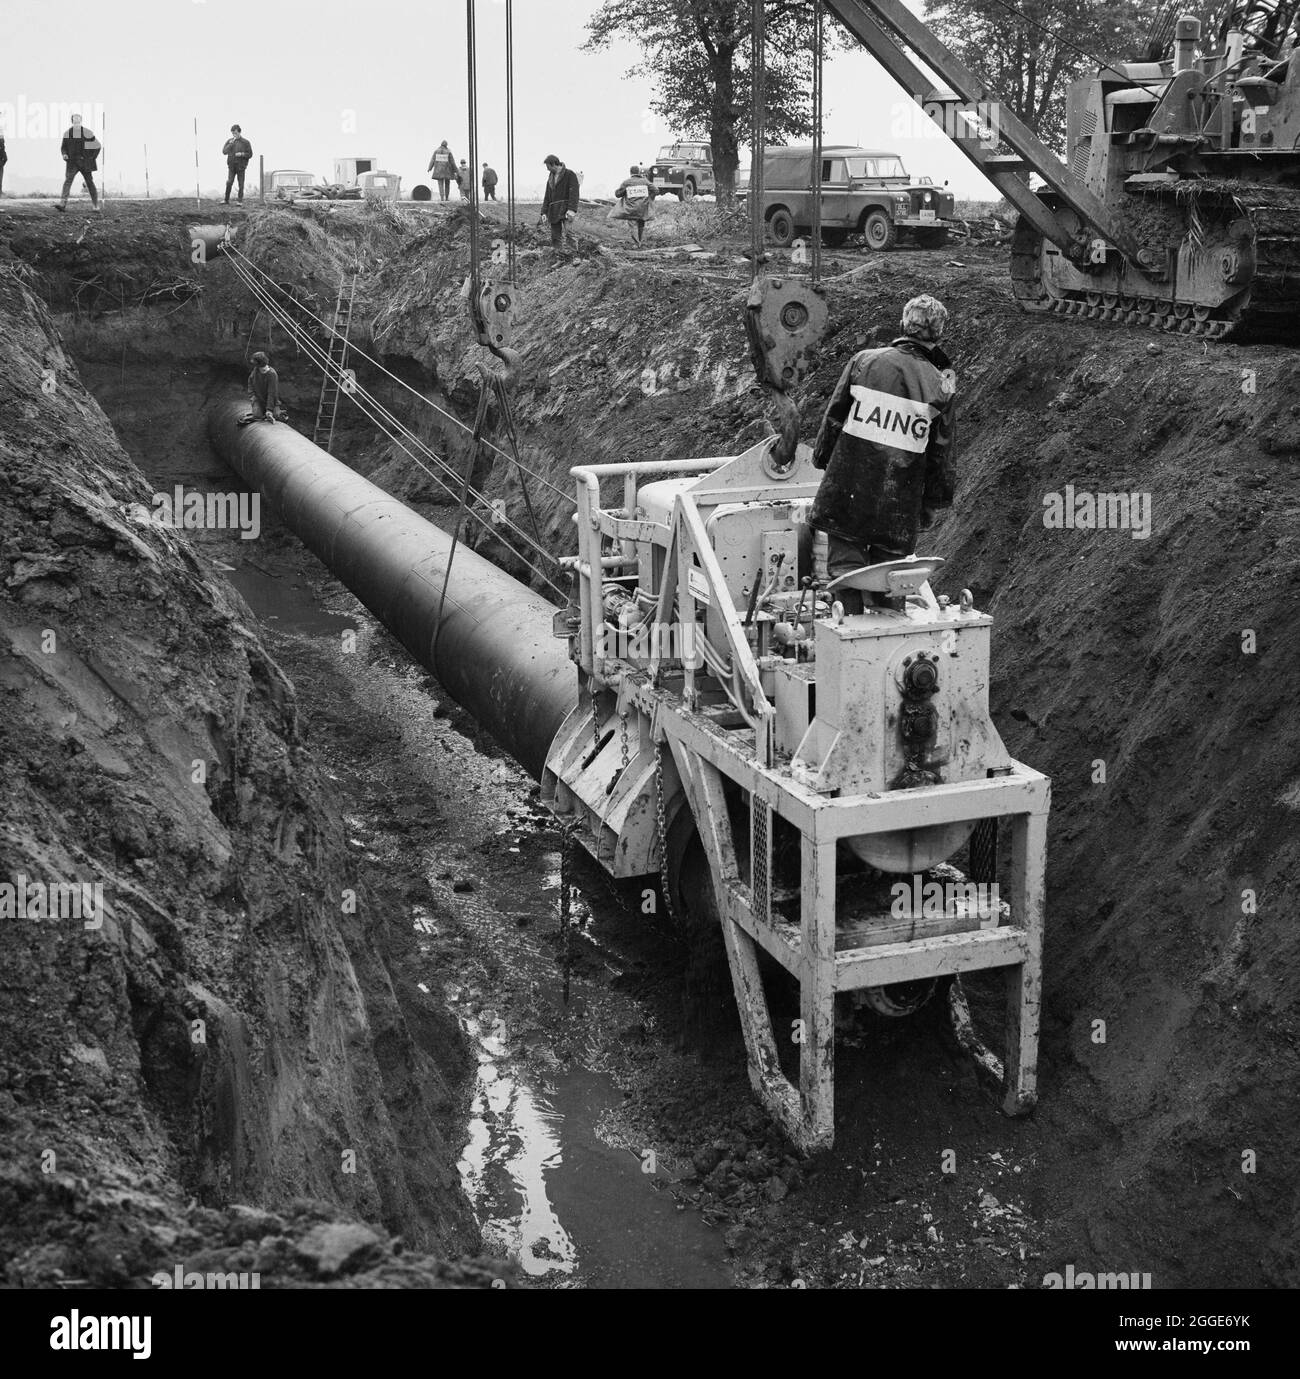 A view of thrust boring being carried out during the installation of the Fens gas pipeline. Work on laying the Fens gas pipeline started in June 1967 and was a joint venture between Laing Civil Engineering and French companies Entrepose and Grands Travaux de Marseille (GTM) for the Gas Council. Over 600 men worked on the project to lay 36 inch diameter steel pipes starting at West Winch in Norfolk and running to where it linked up with the next contract at Woodcroft Castle in Cambridgeshire. The pipeline crossed four rivers and numerous dykes and ditches. Stock Photo